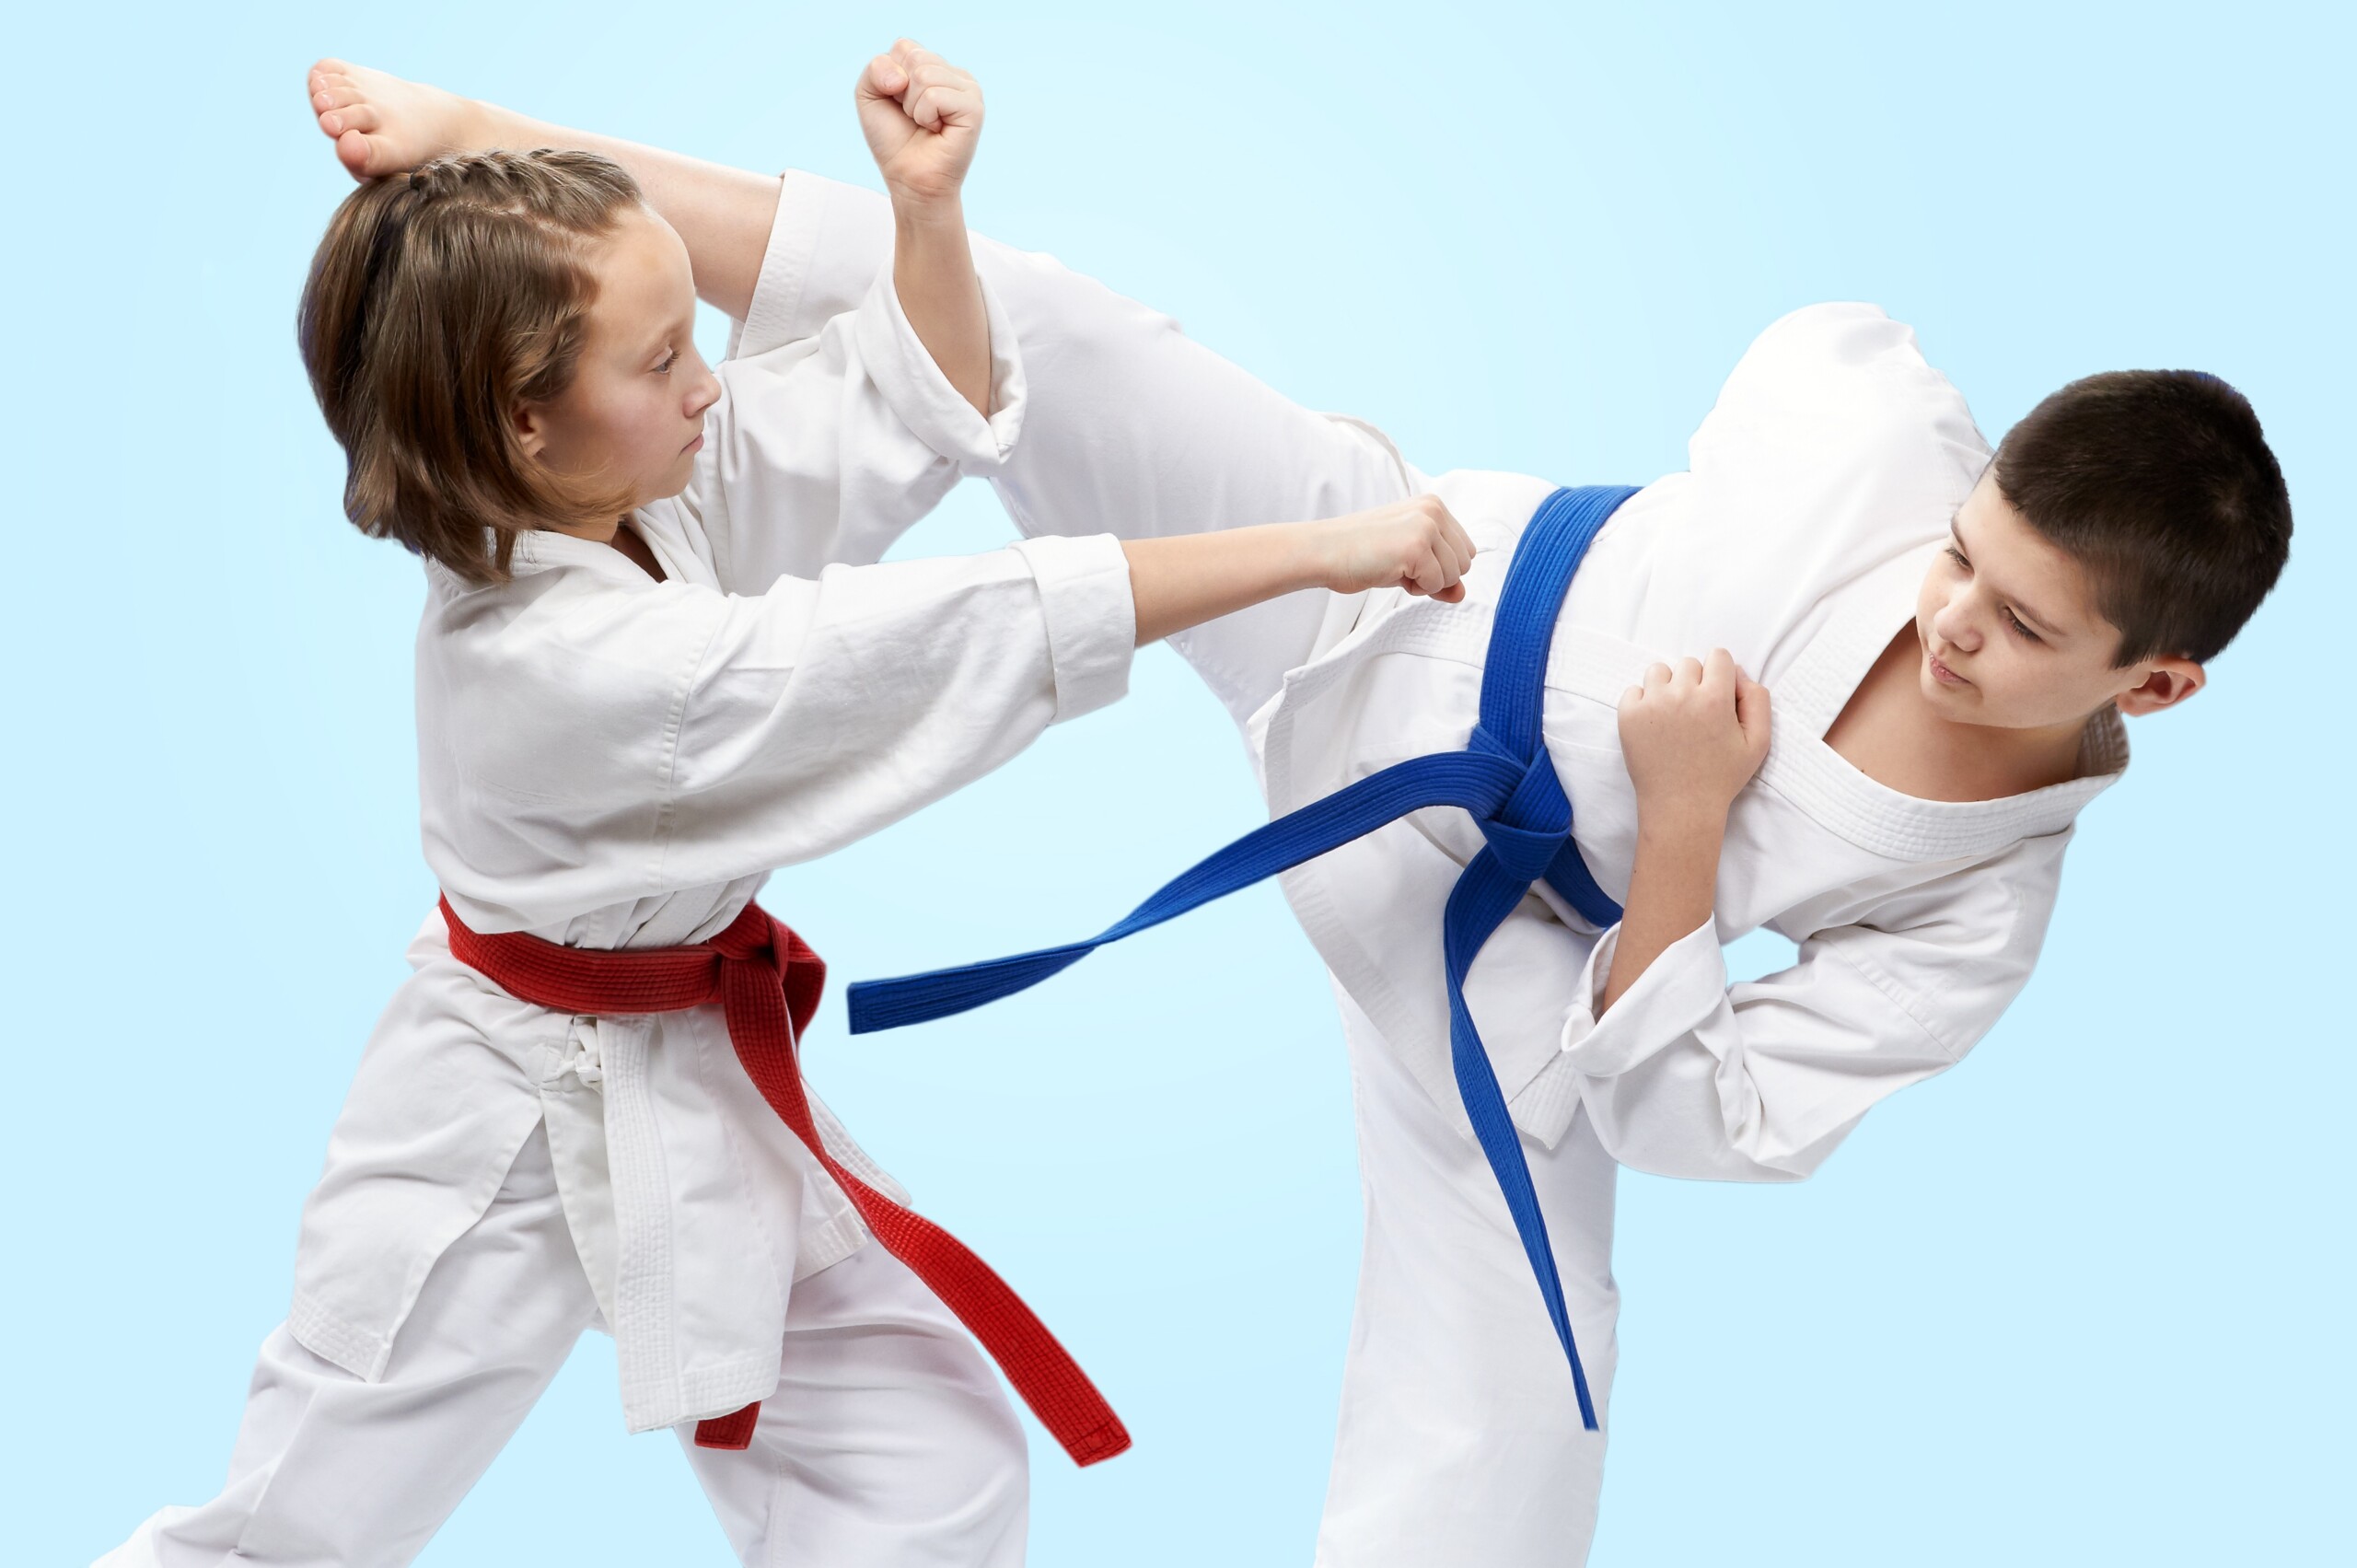 Can Karate Prevent Bullied Kids from Suicide Attempts?